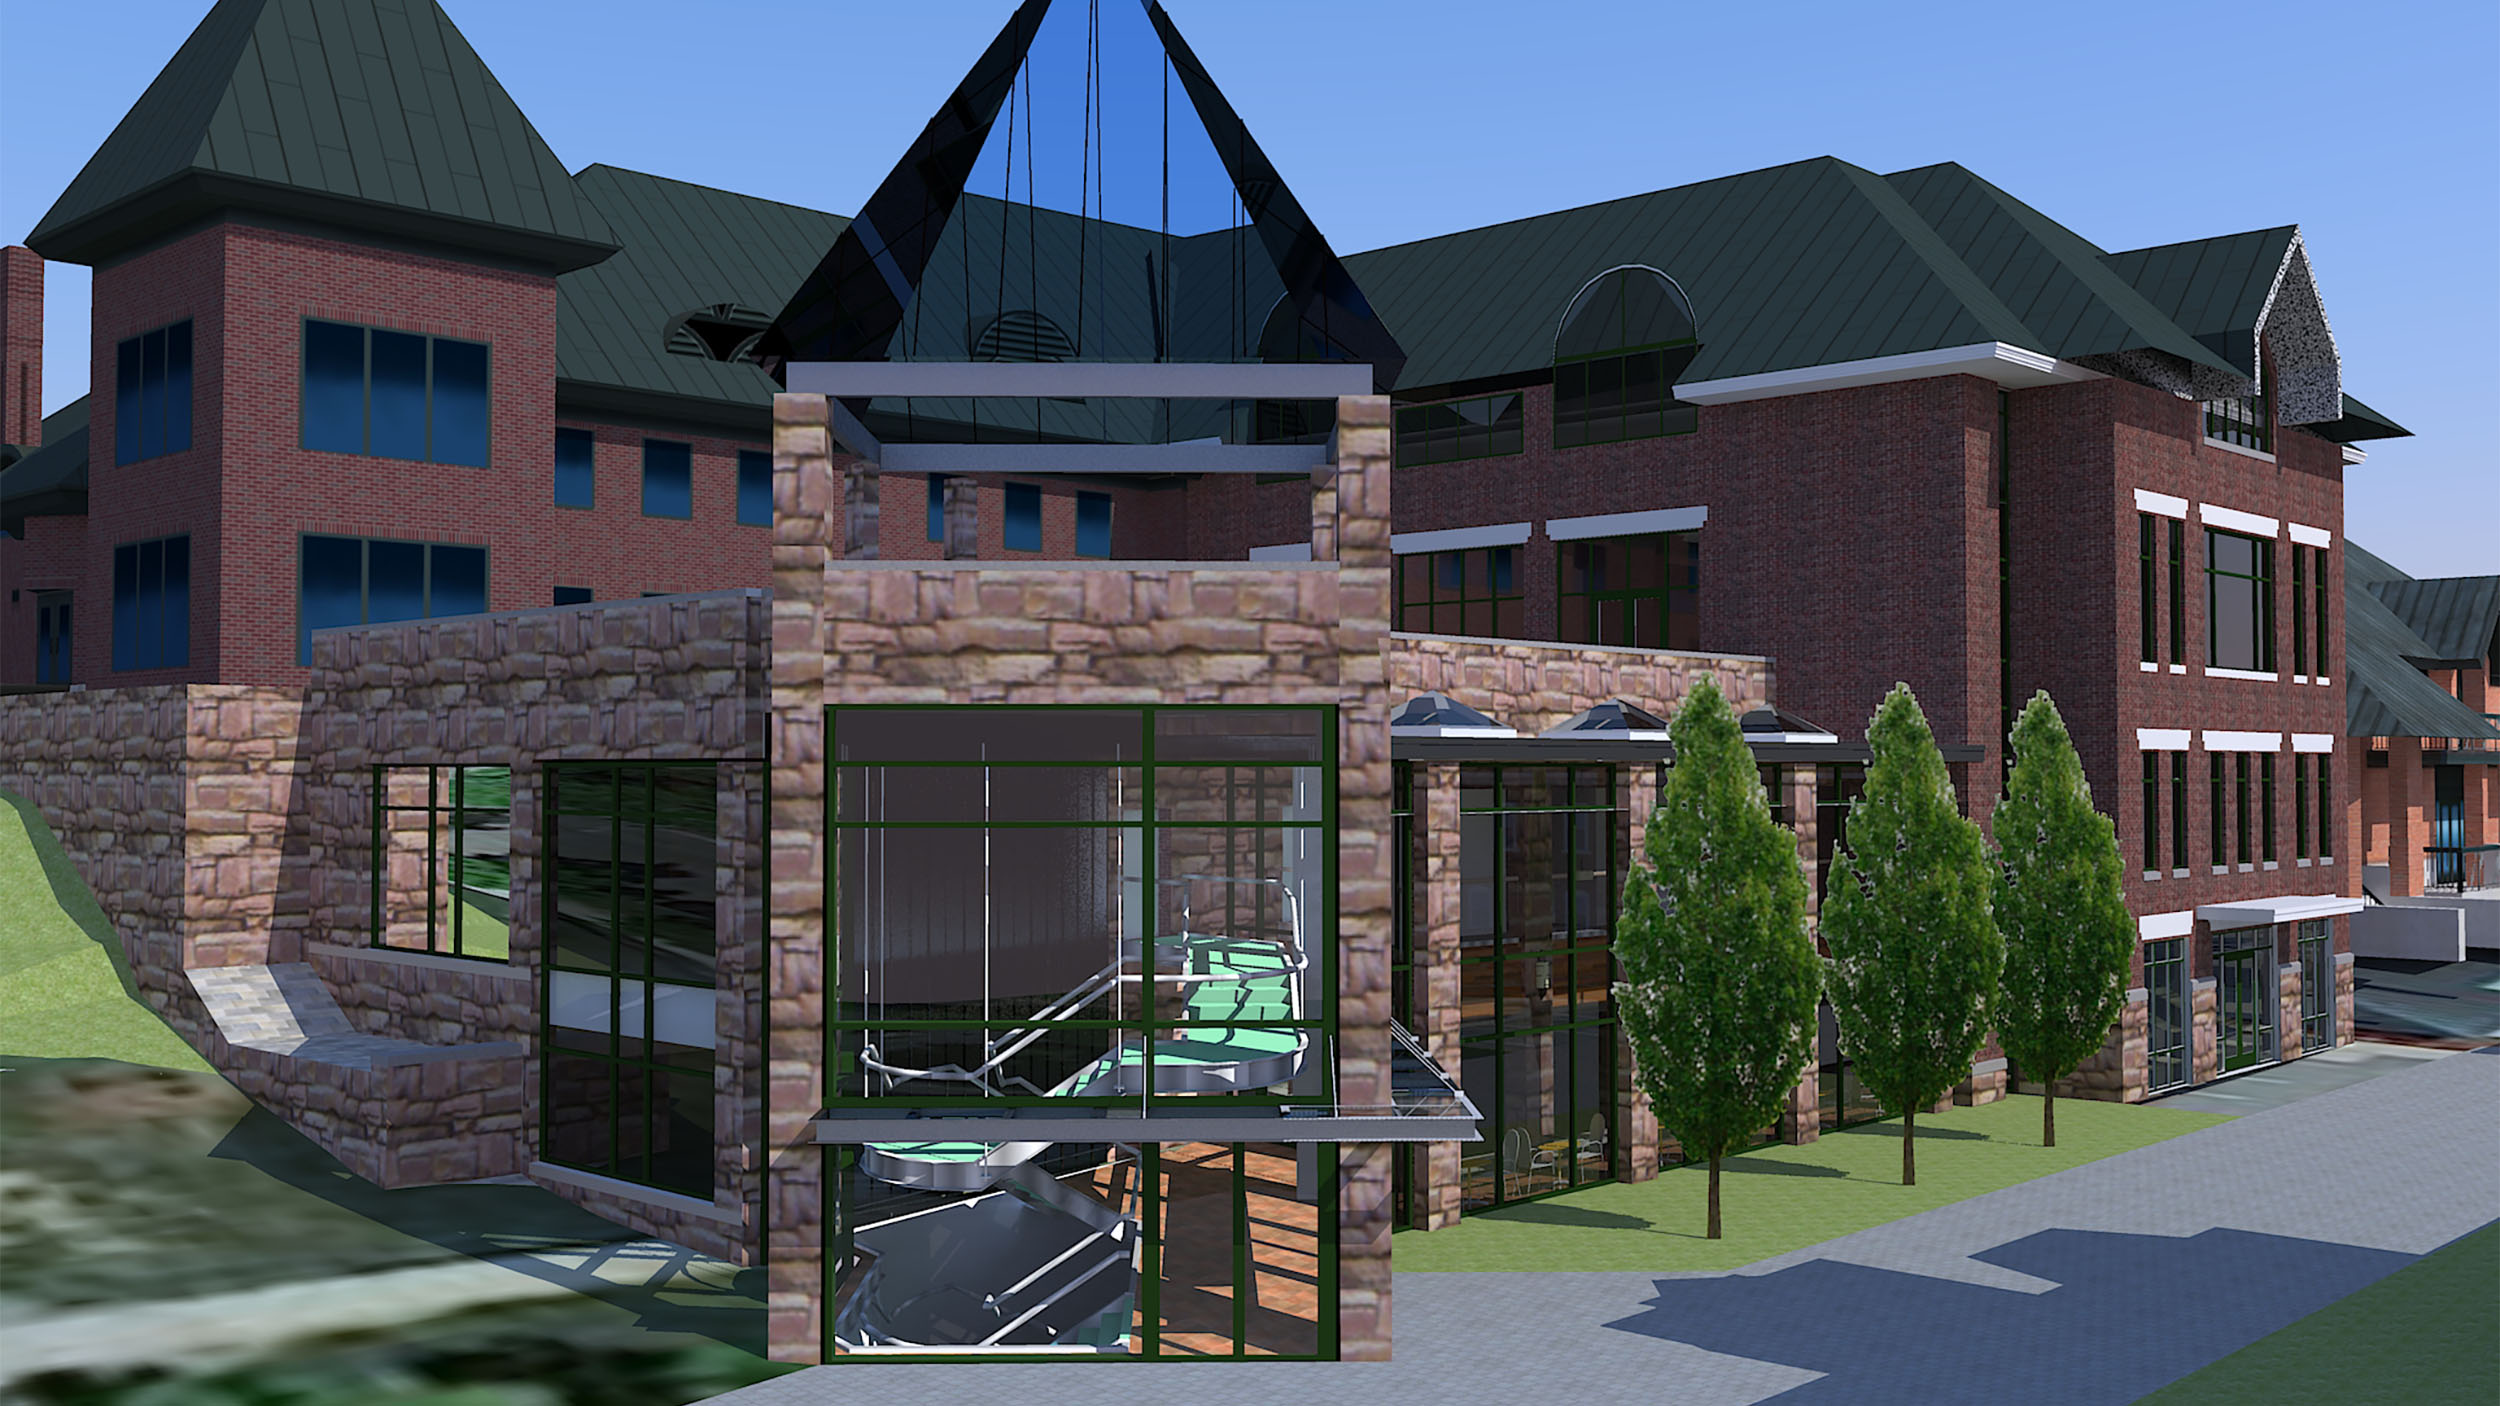 a digital rendering of what the communication & creative media building is supposed to look like once complete